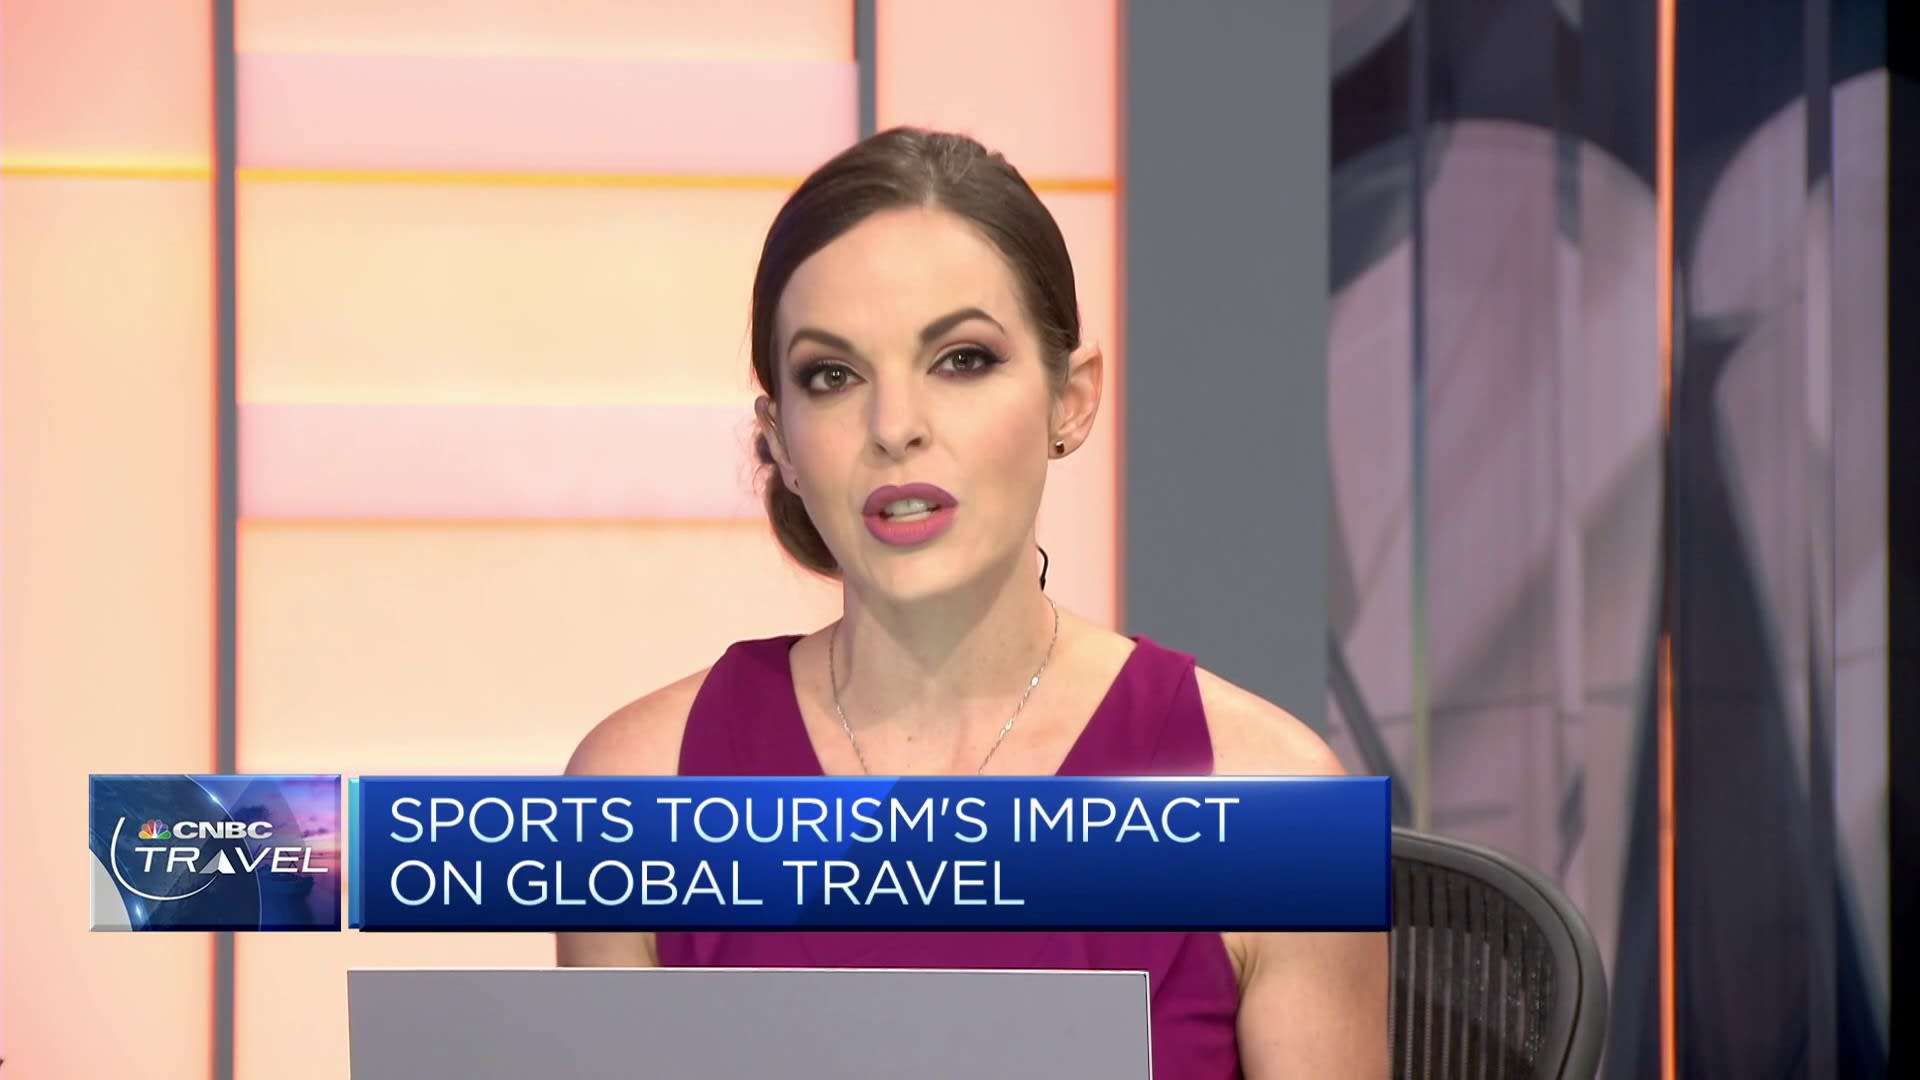 'Sports tourism' is one of the fastest-growing sectors in travel, says UNWTO